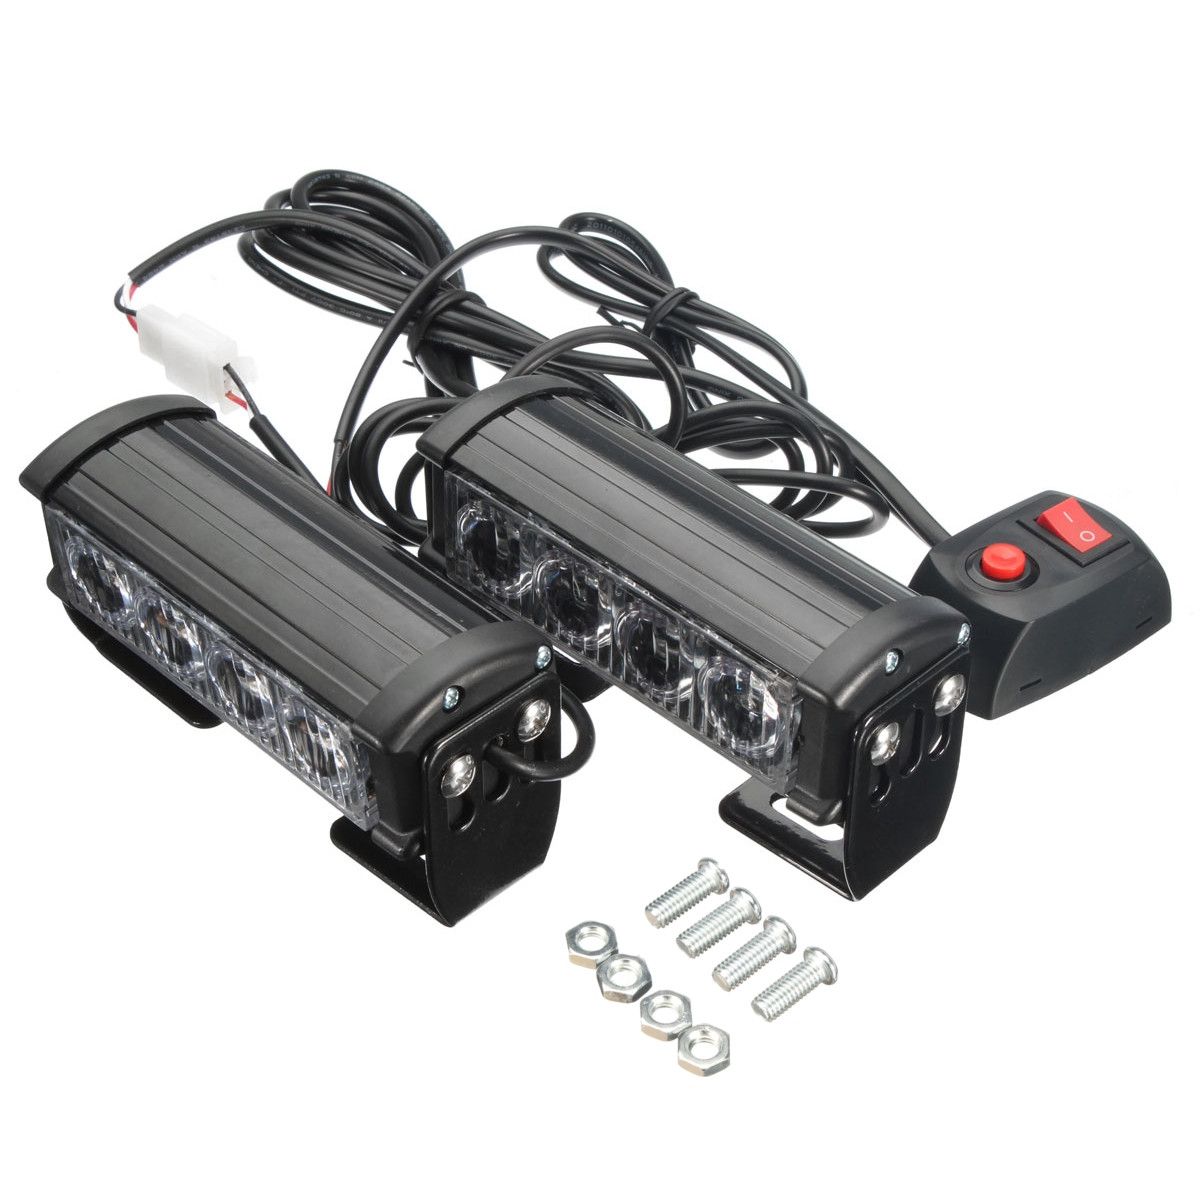 2PCS-12V-LED-Strobe-Flash-Lights-Front-Grille-Warning-Lamp-Waterproof-with-7-Flashing-Modes-Switch-f-1059762